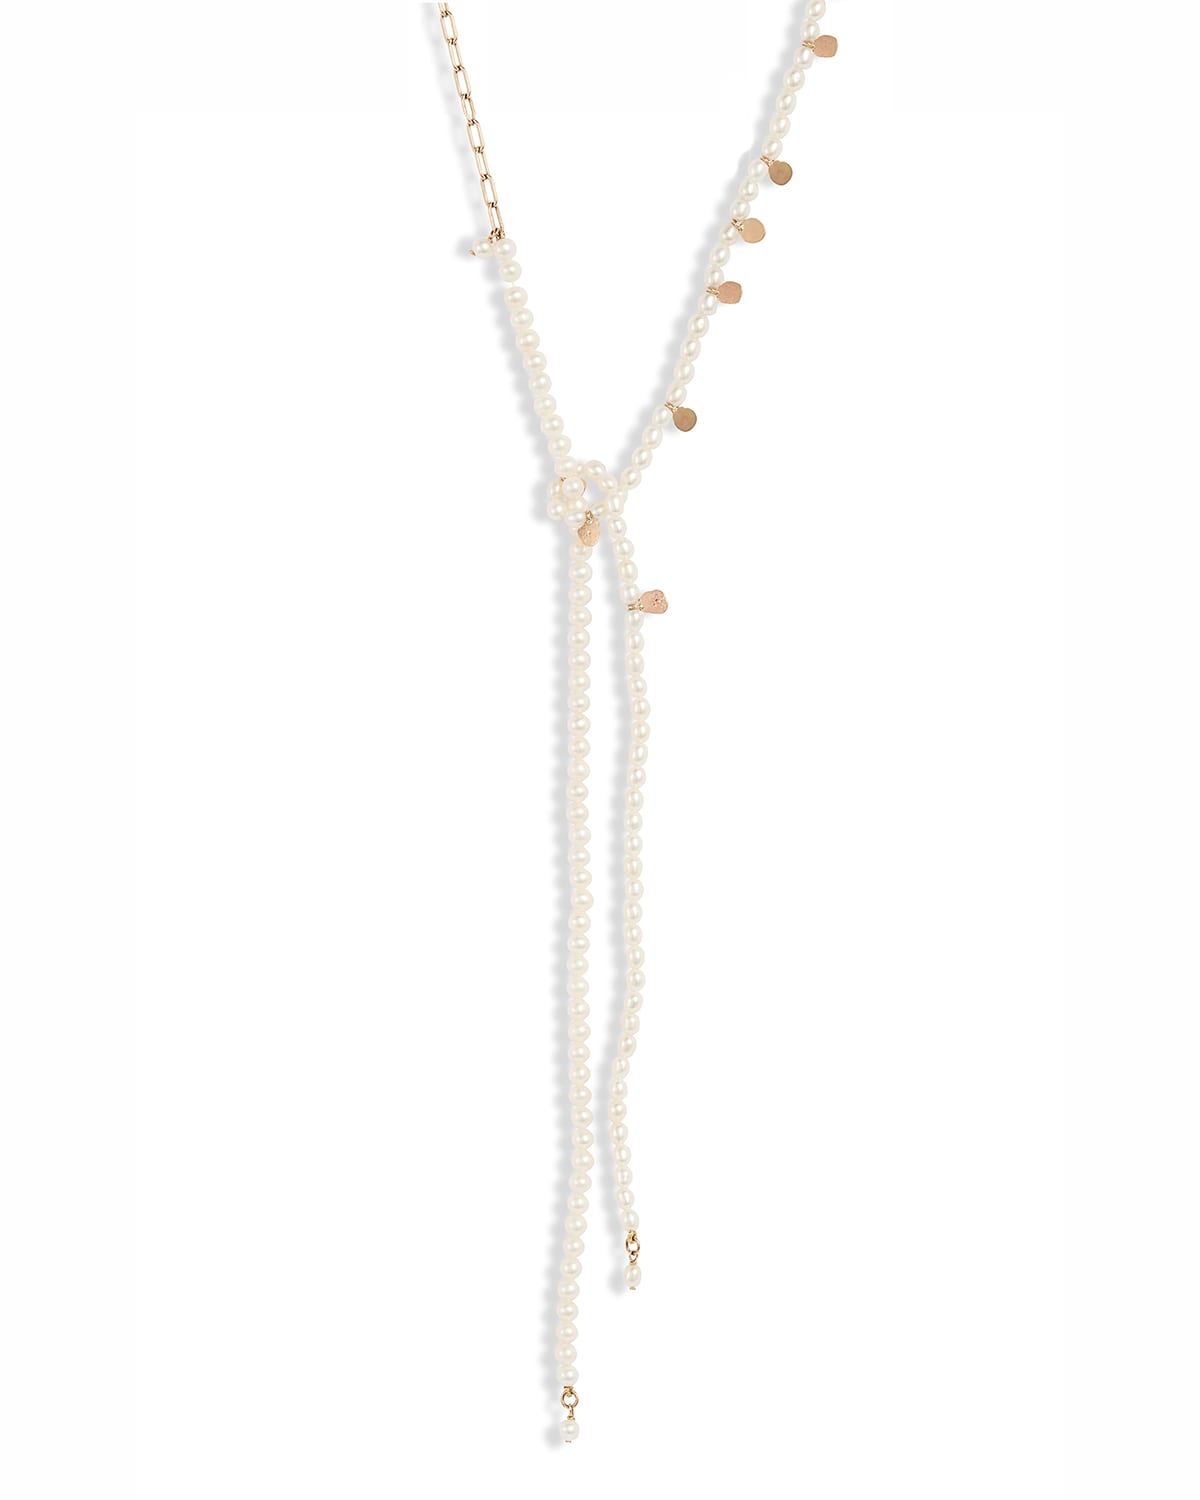 Poppy Finch 14k Gold Mixed Pearl Chain Lariat Necklace